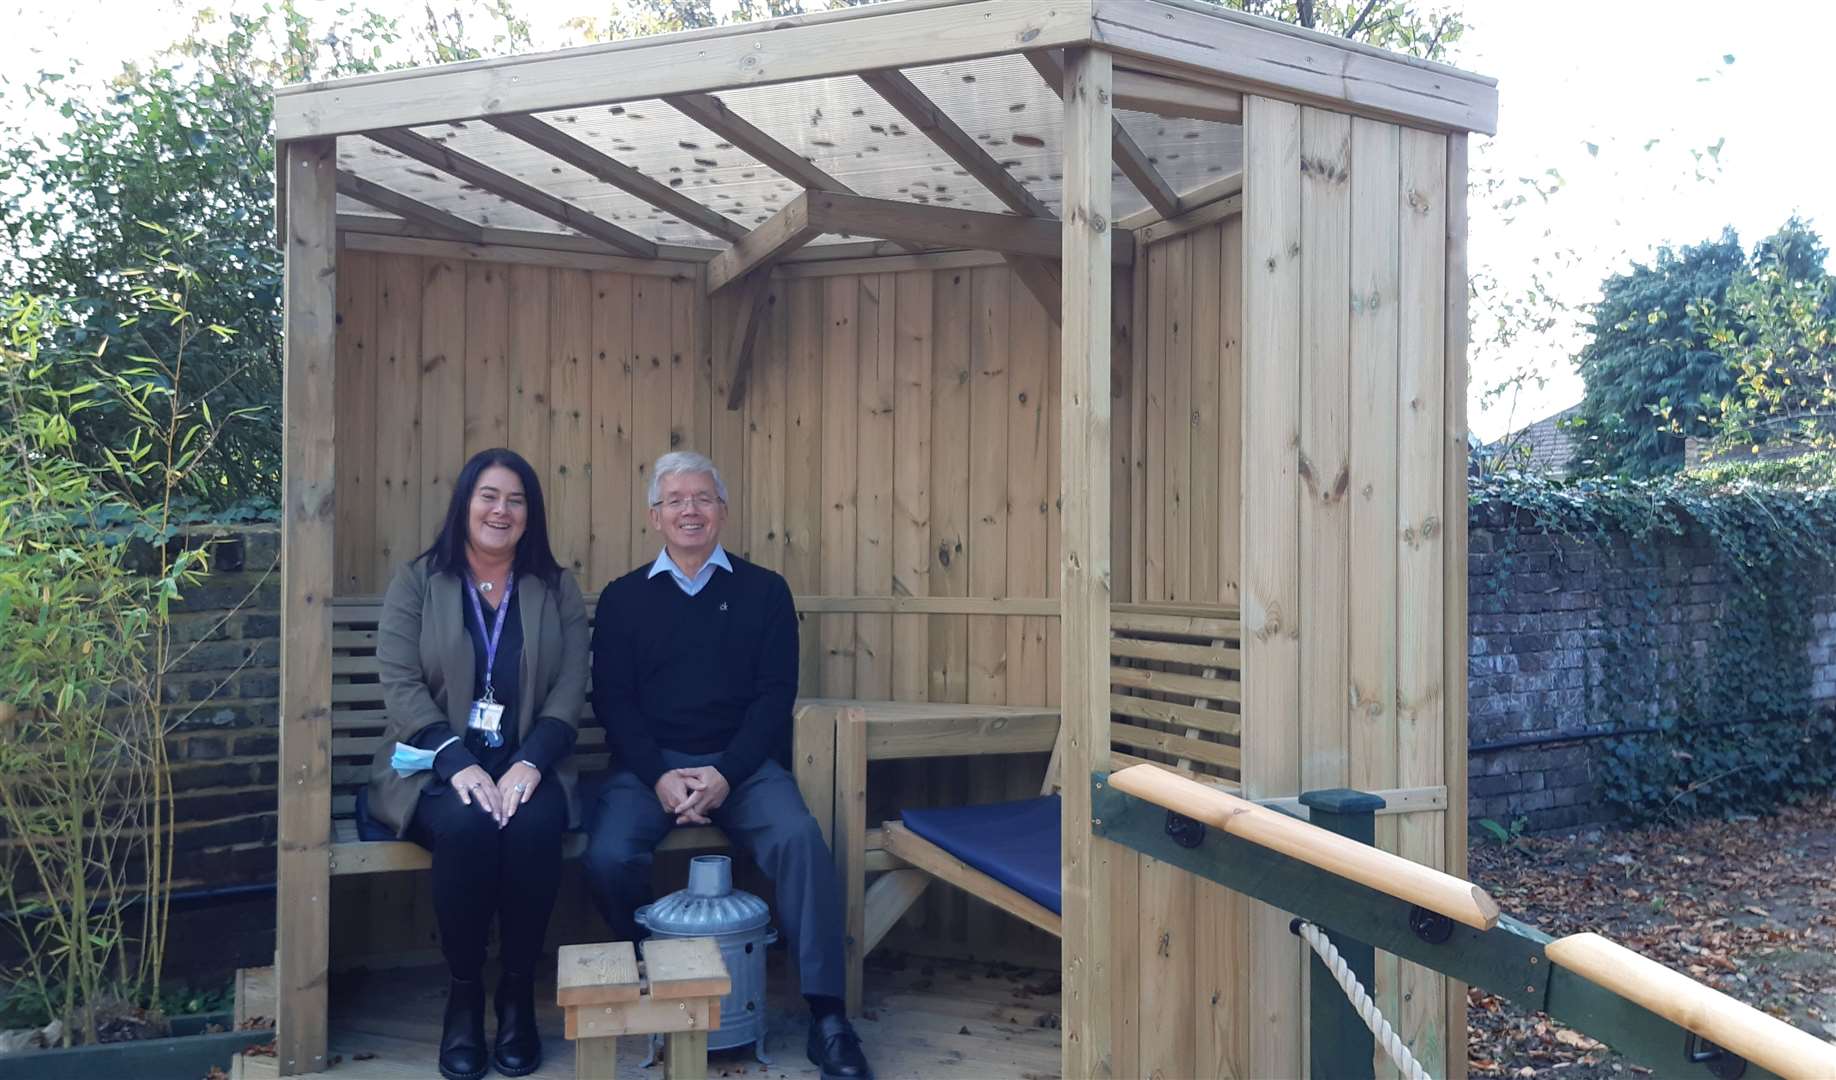 Tracy Maybank, assistant manager at Maidstone Day Centre, and Des Long, Homeless Care trustee, in the new open gazebo at Goodsell House (53895496)